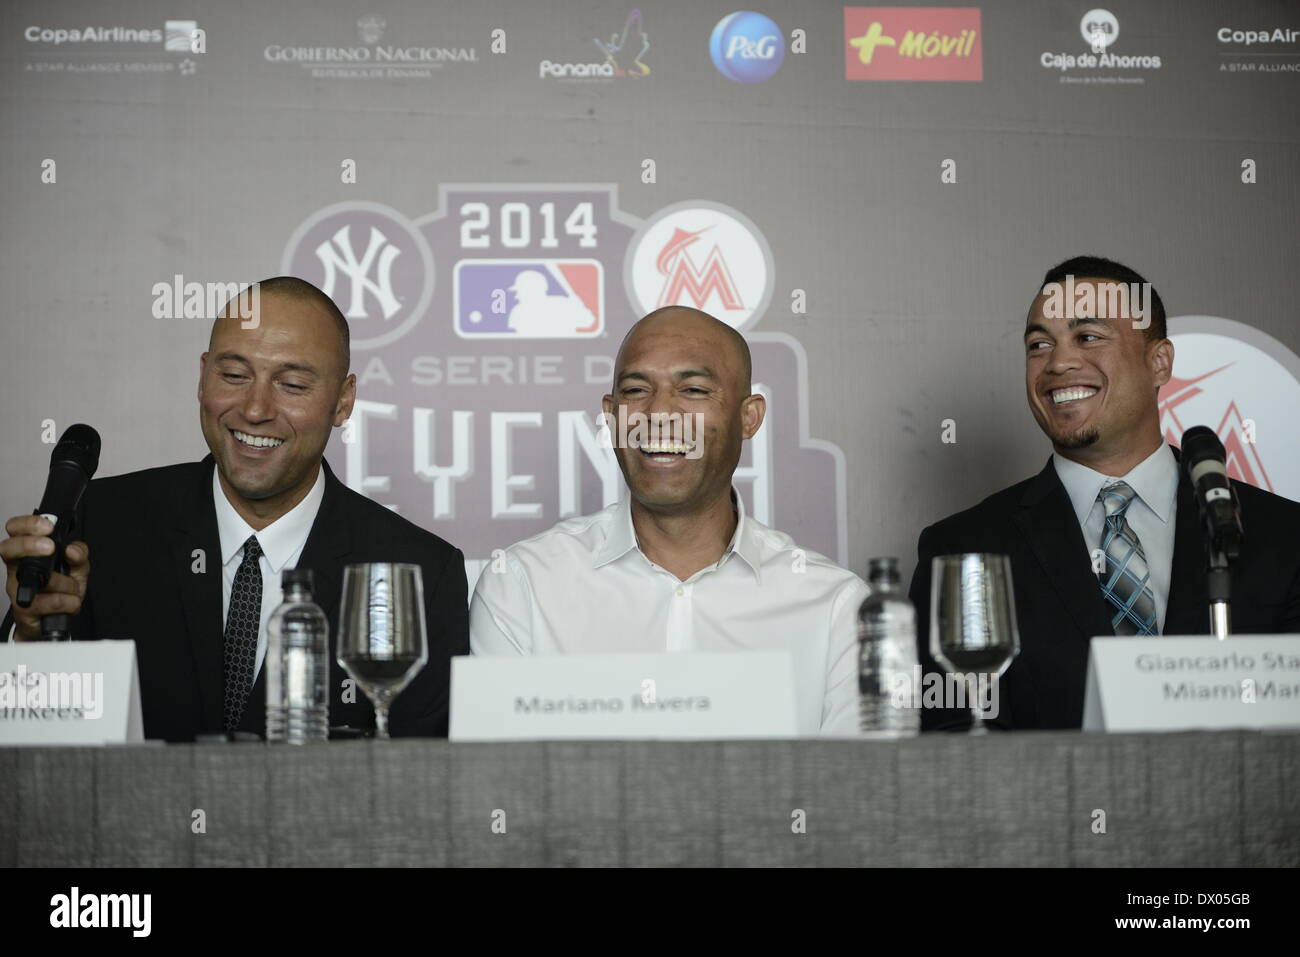 Panama City, Panama. 15th Mar, 2014. Player, and former player of the New York Yankees, Derek Jeter (L) and Mariano Rivera (C), along with Giancarlo Stanton of the Miami Marlins take part in a press conference in Panama City, capital of Panama, on March 15, 2014. The New York Yankees and the Miami Marlins will play two exhibition games in homage to Mariano Rivera. Credit:  Mauricio Valenzuela/Xinhua/Alamy Live News Stock Photo